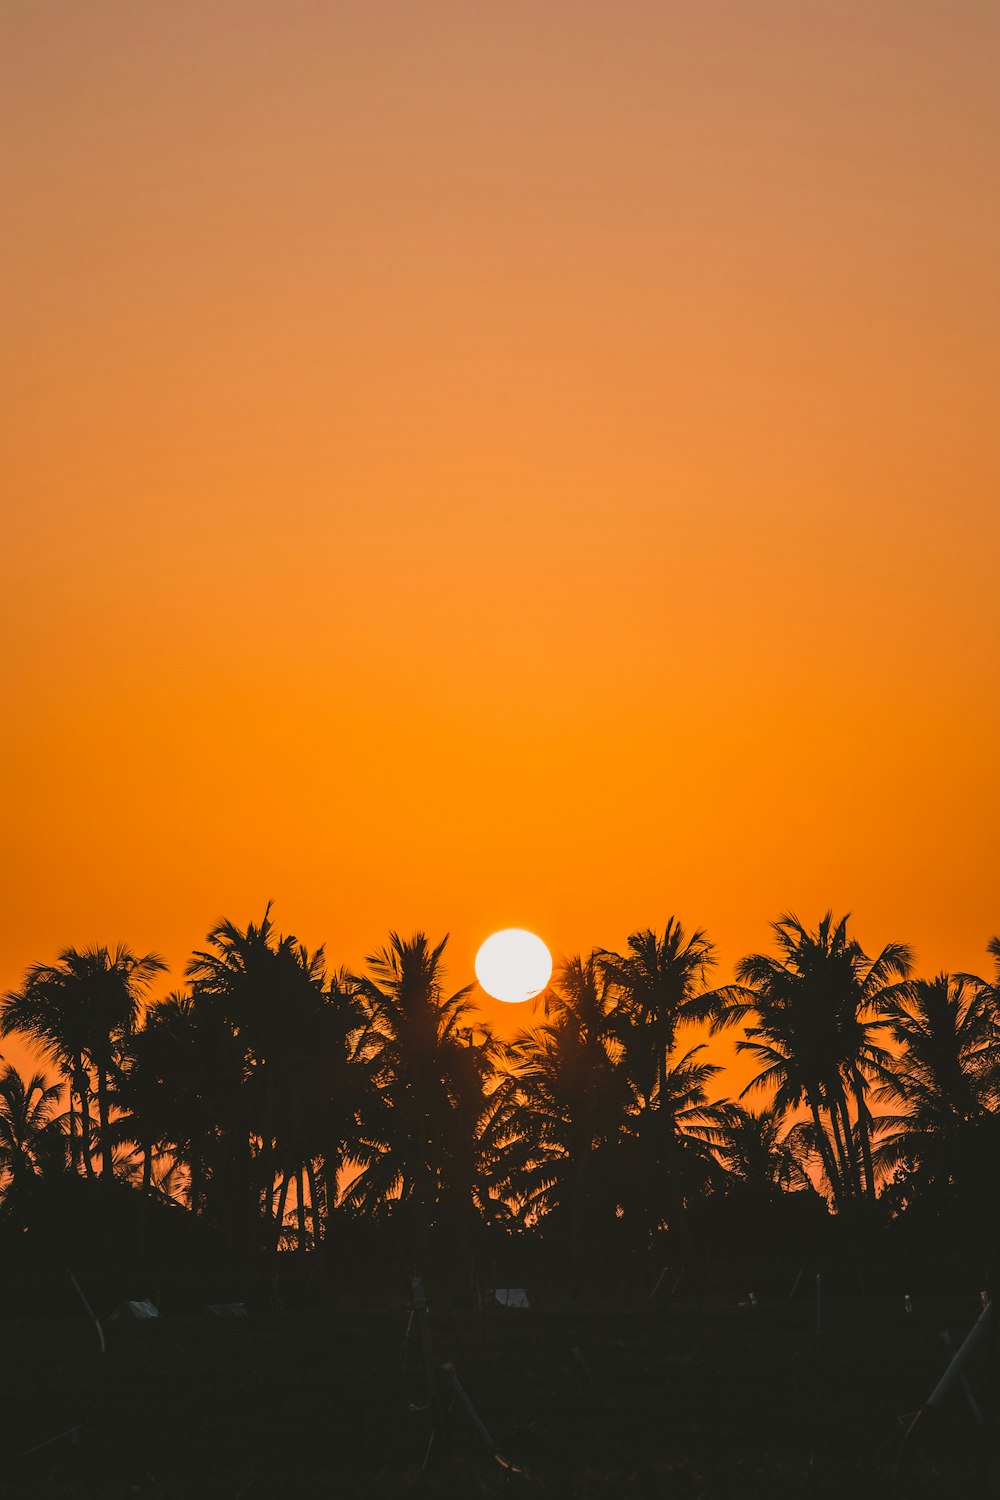 the sun is setting over the palm trees